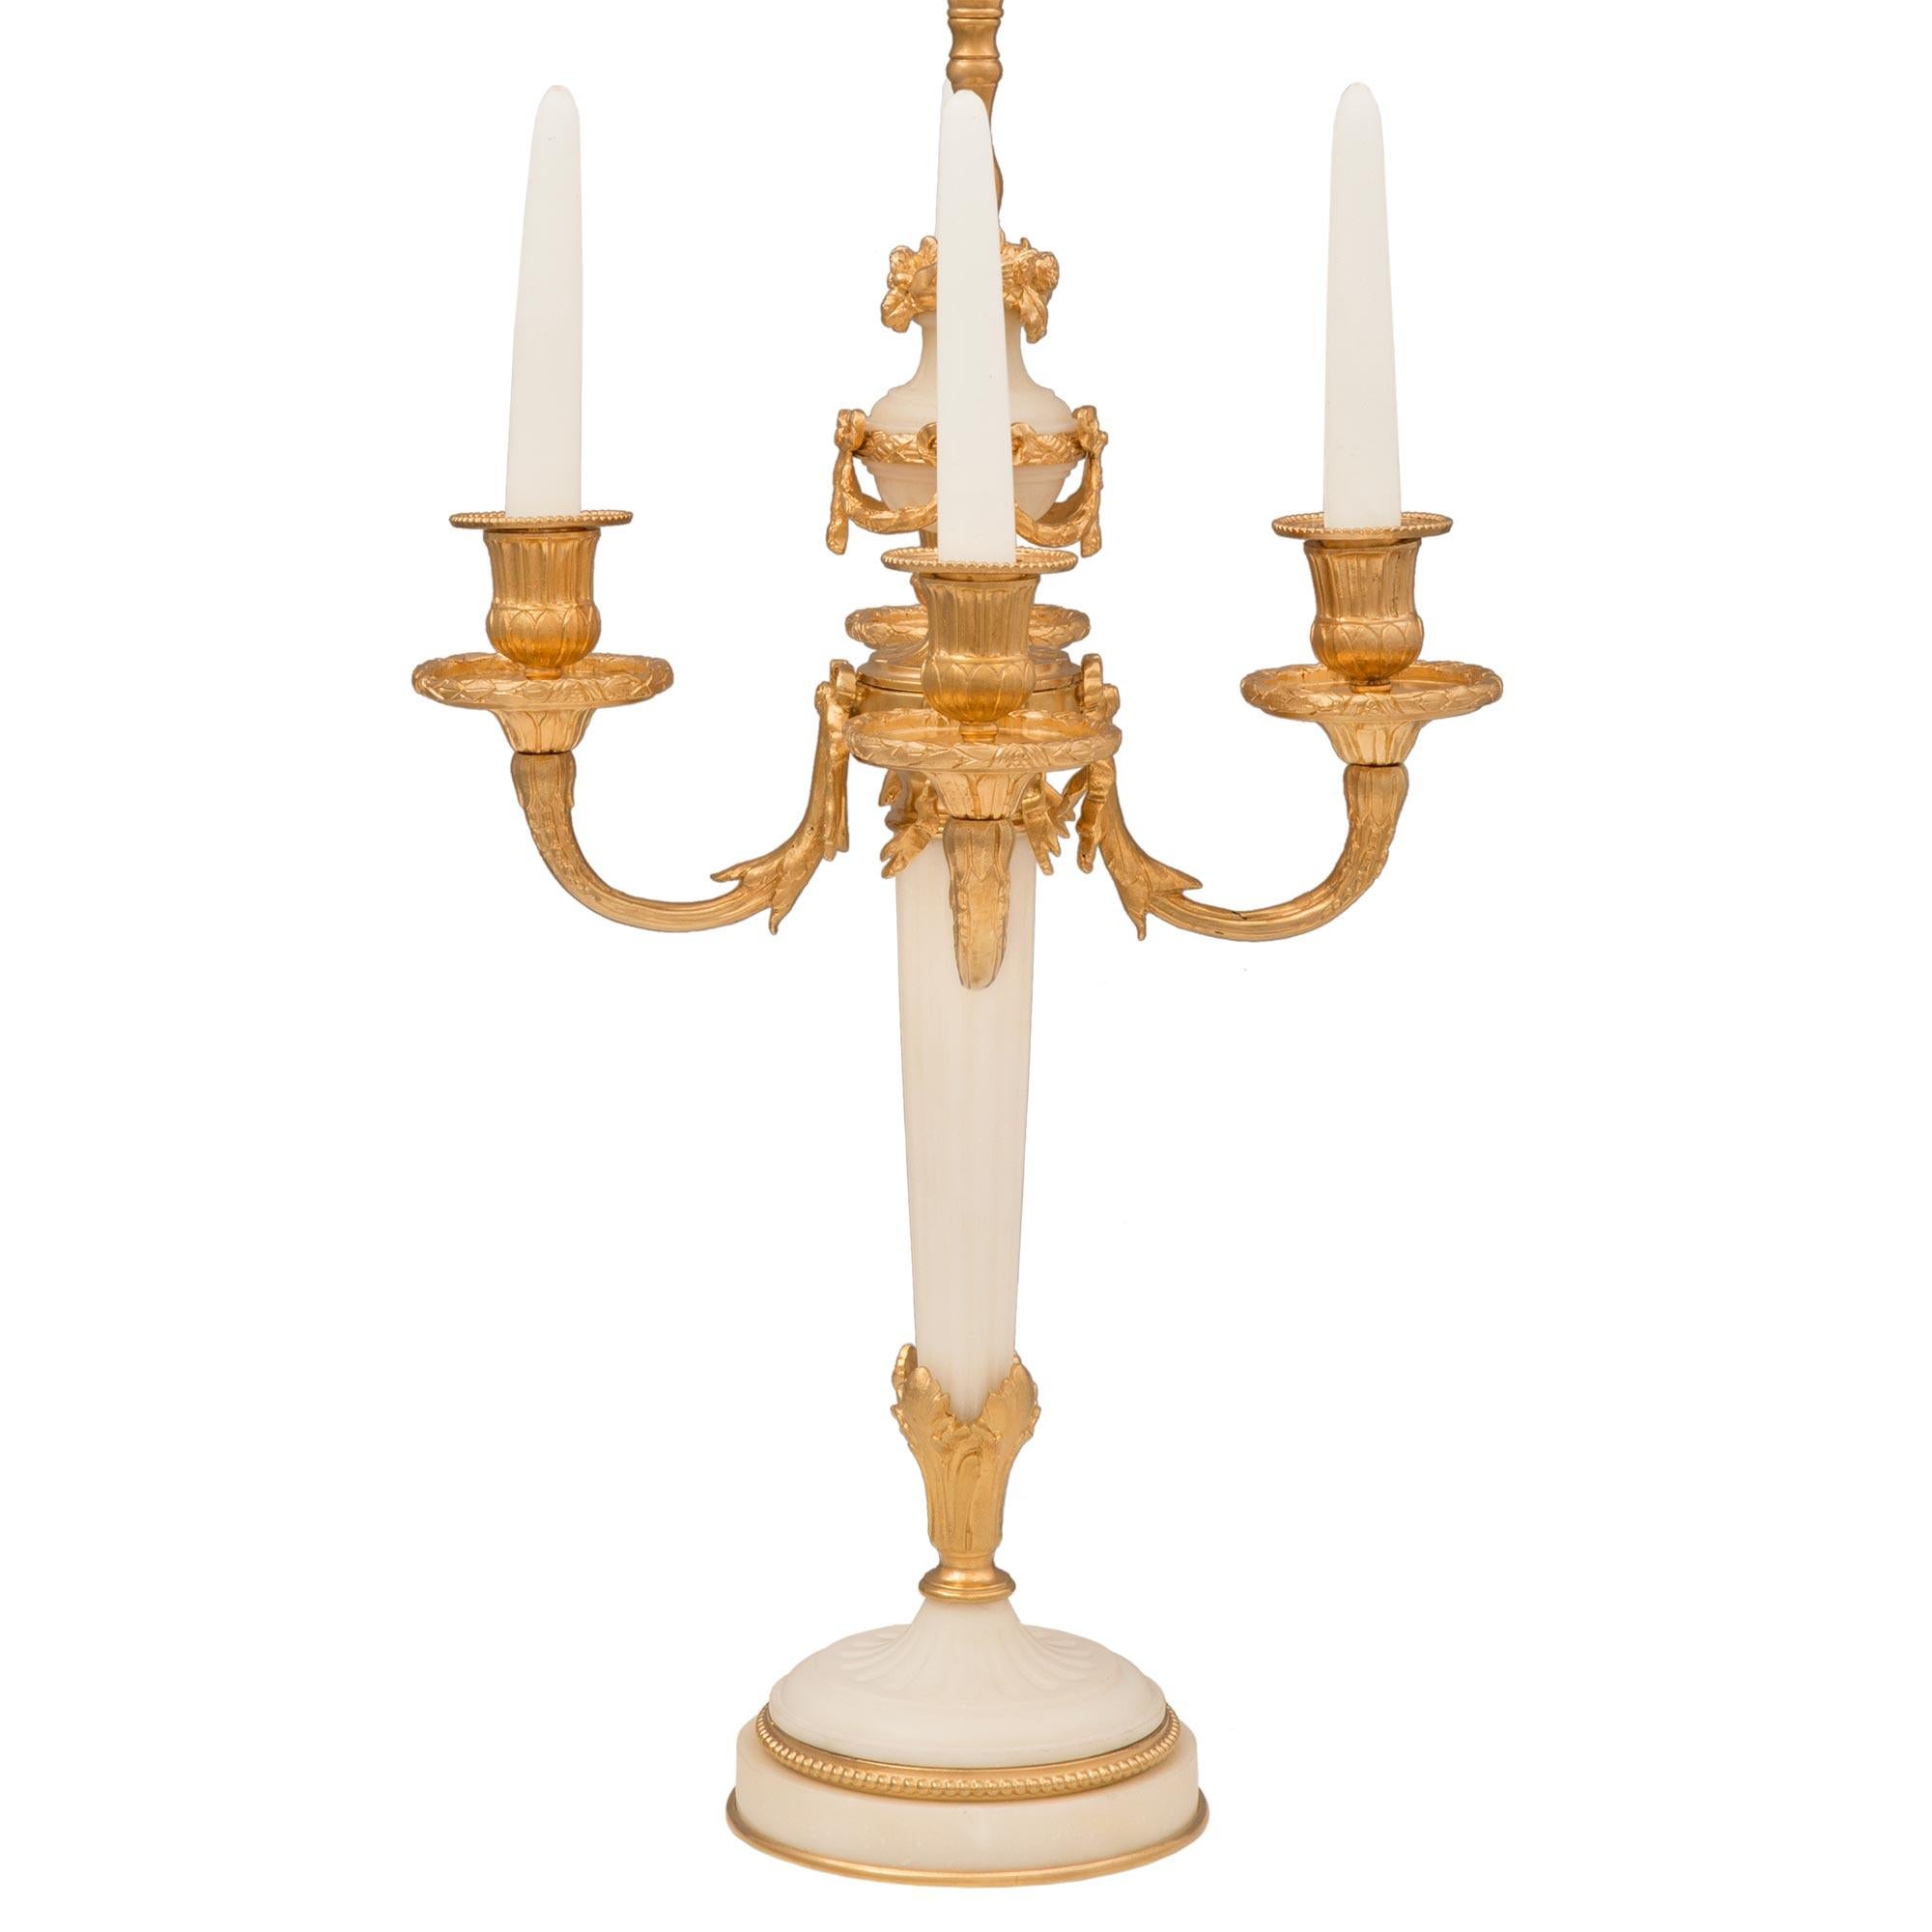 An extremely elegant and high quality pair of French 19th century Louis XVI st. ormolu and white Carrara marble lamps. Each four arm lamp is raised by a circular white Carrara marble base with a fine bottom ormolu fillet, a lovely wrap around beaded